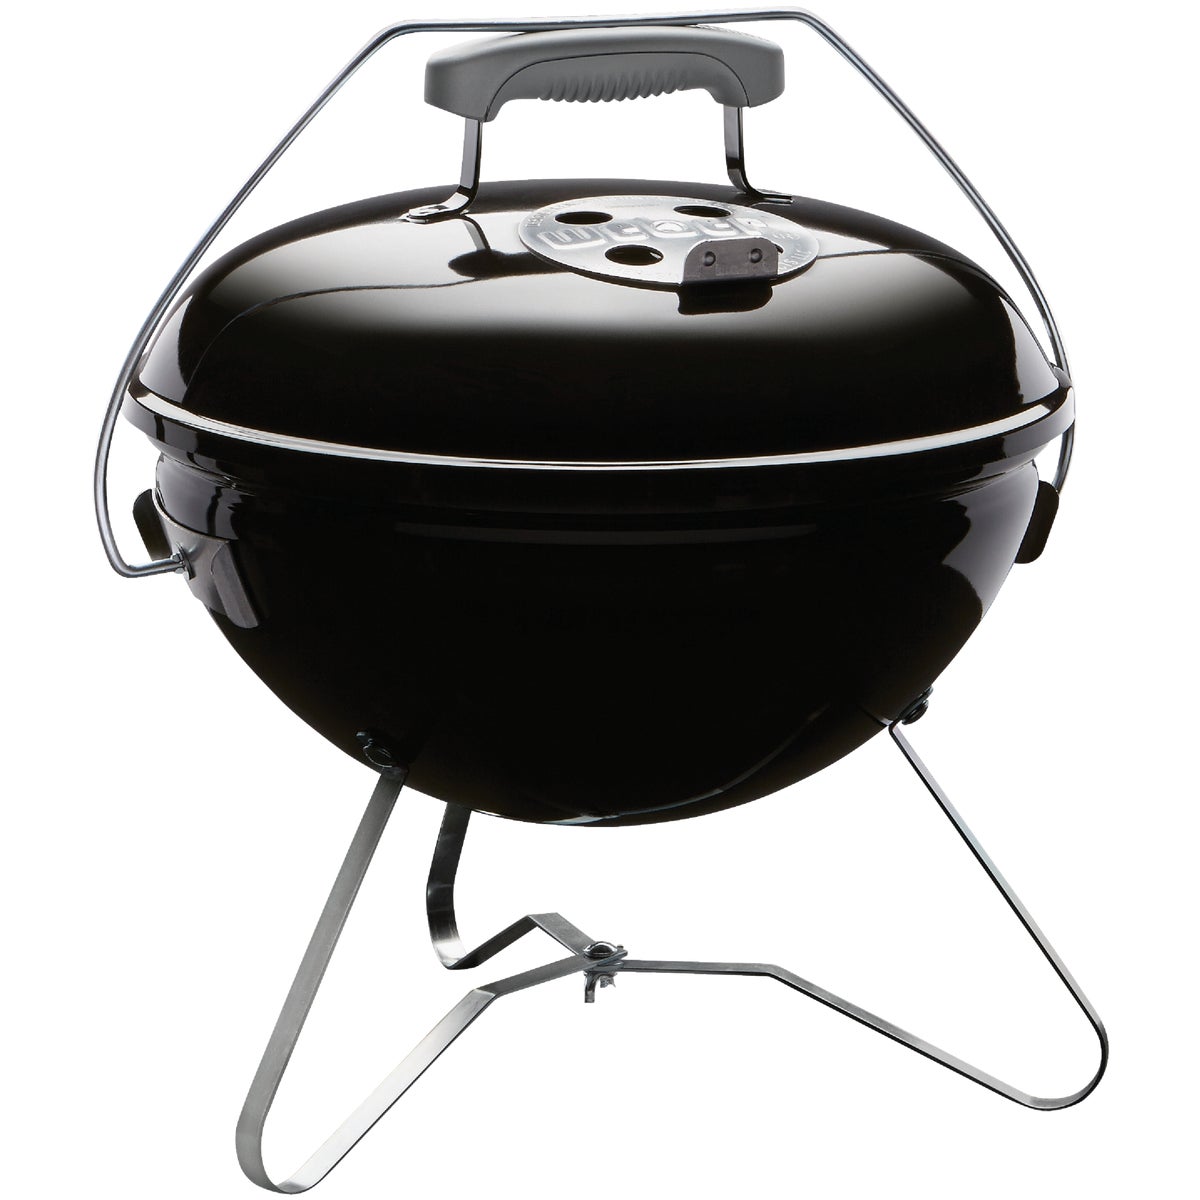 Item 803022, Portable, premium charcoal grill that is compact enough to travel with you